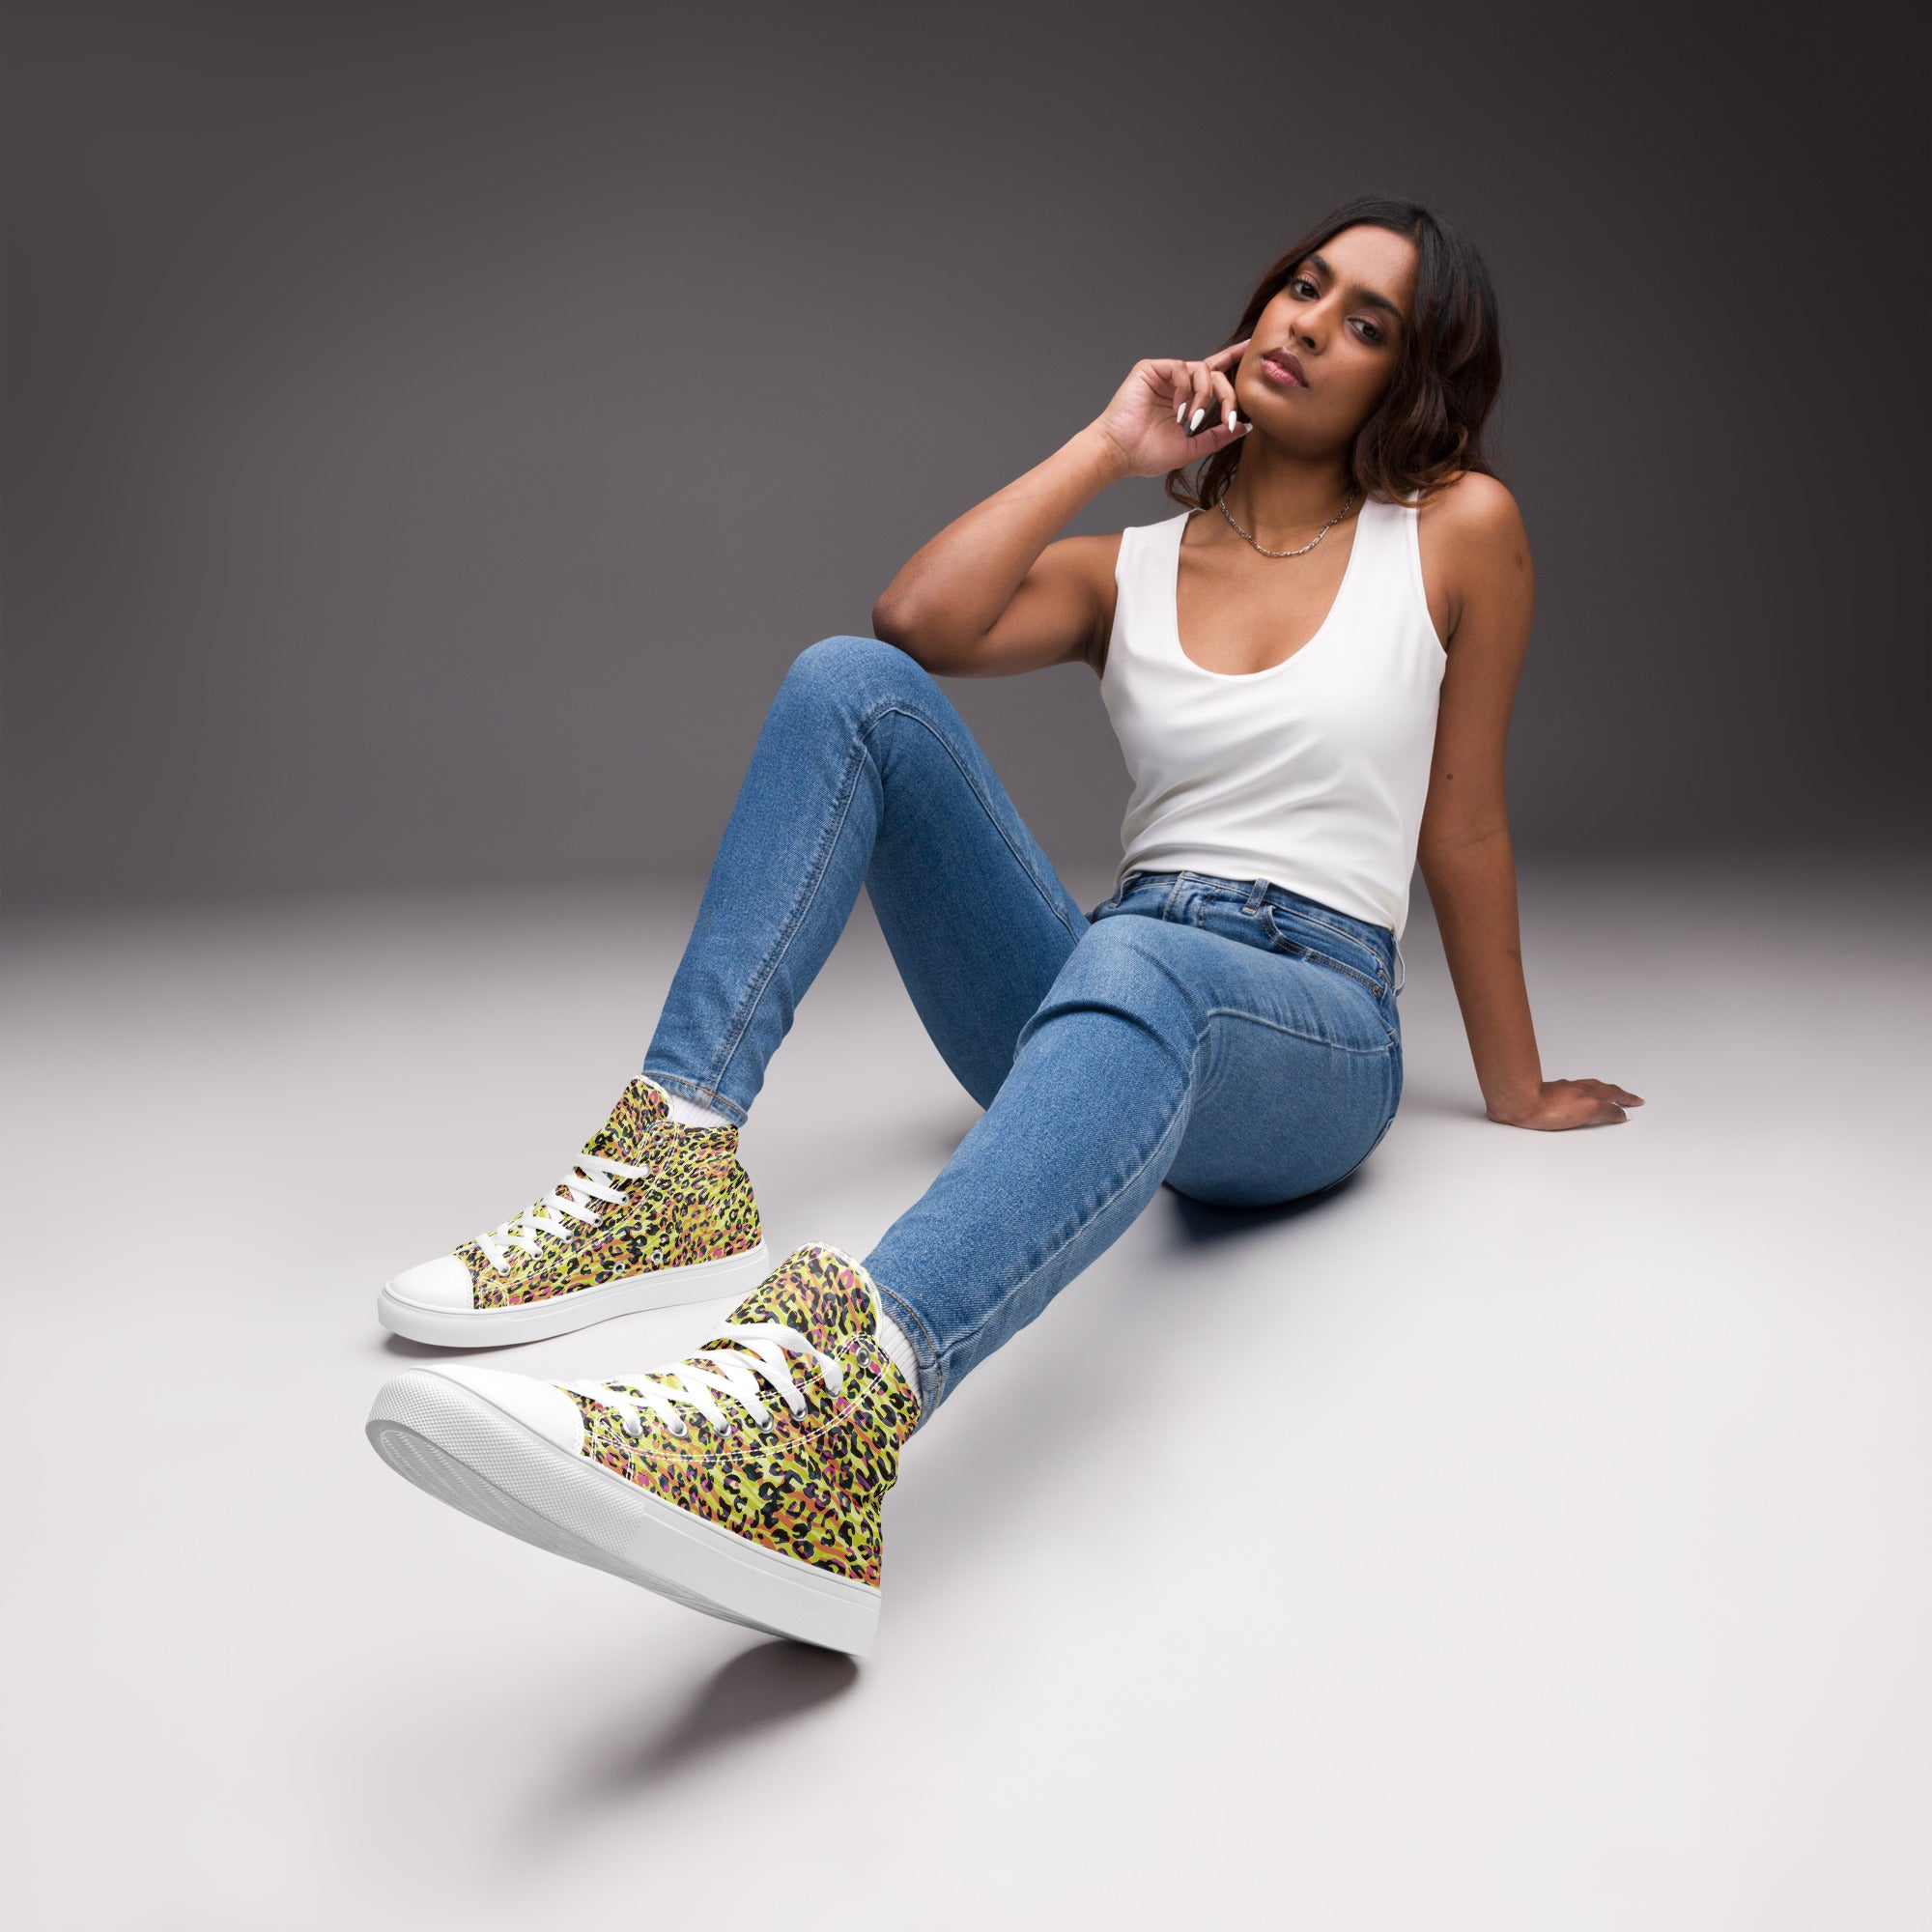 Women’s high top canvas shoes- Zebra and Leopard Print Yellow with Orange